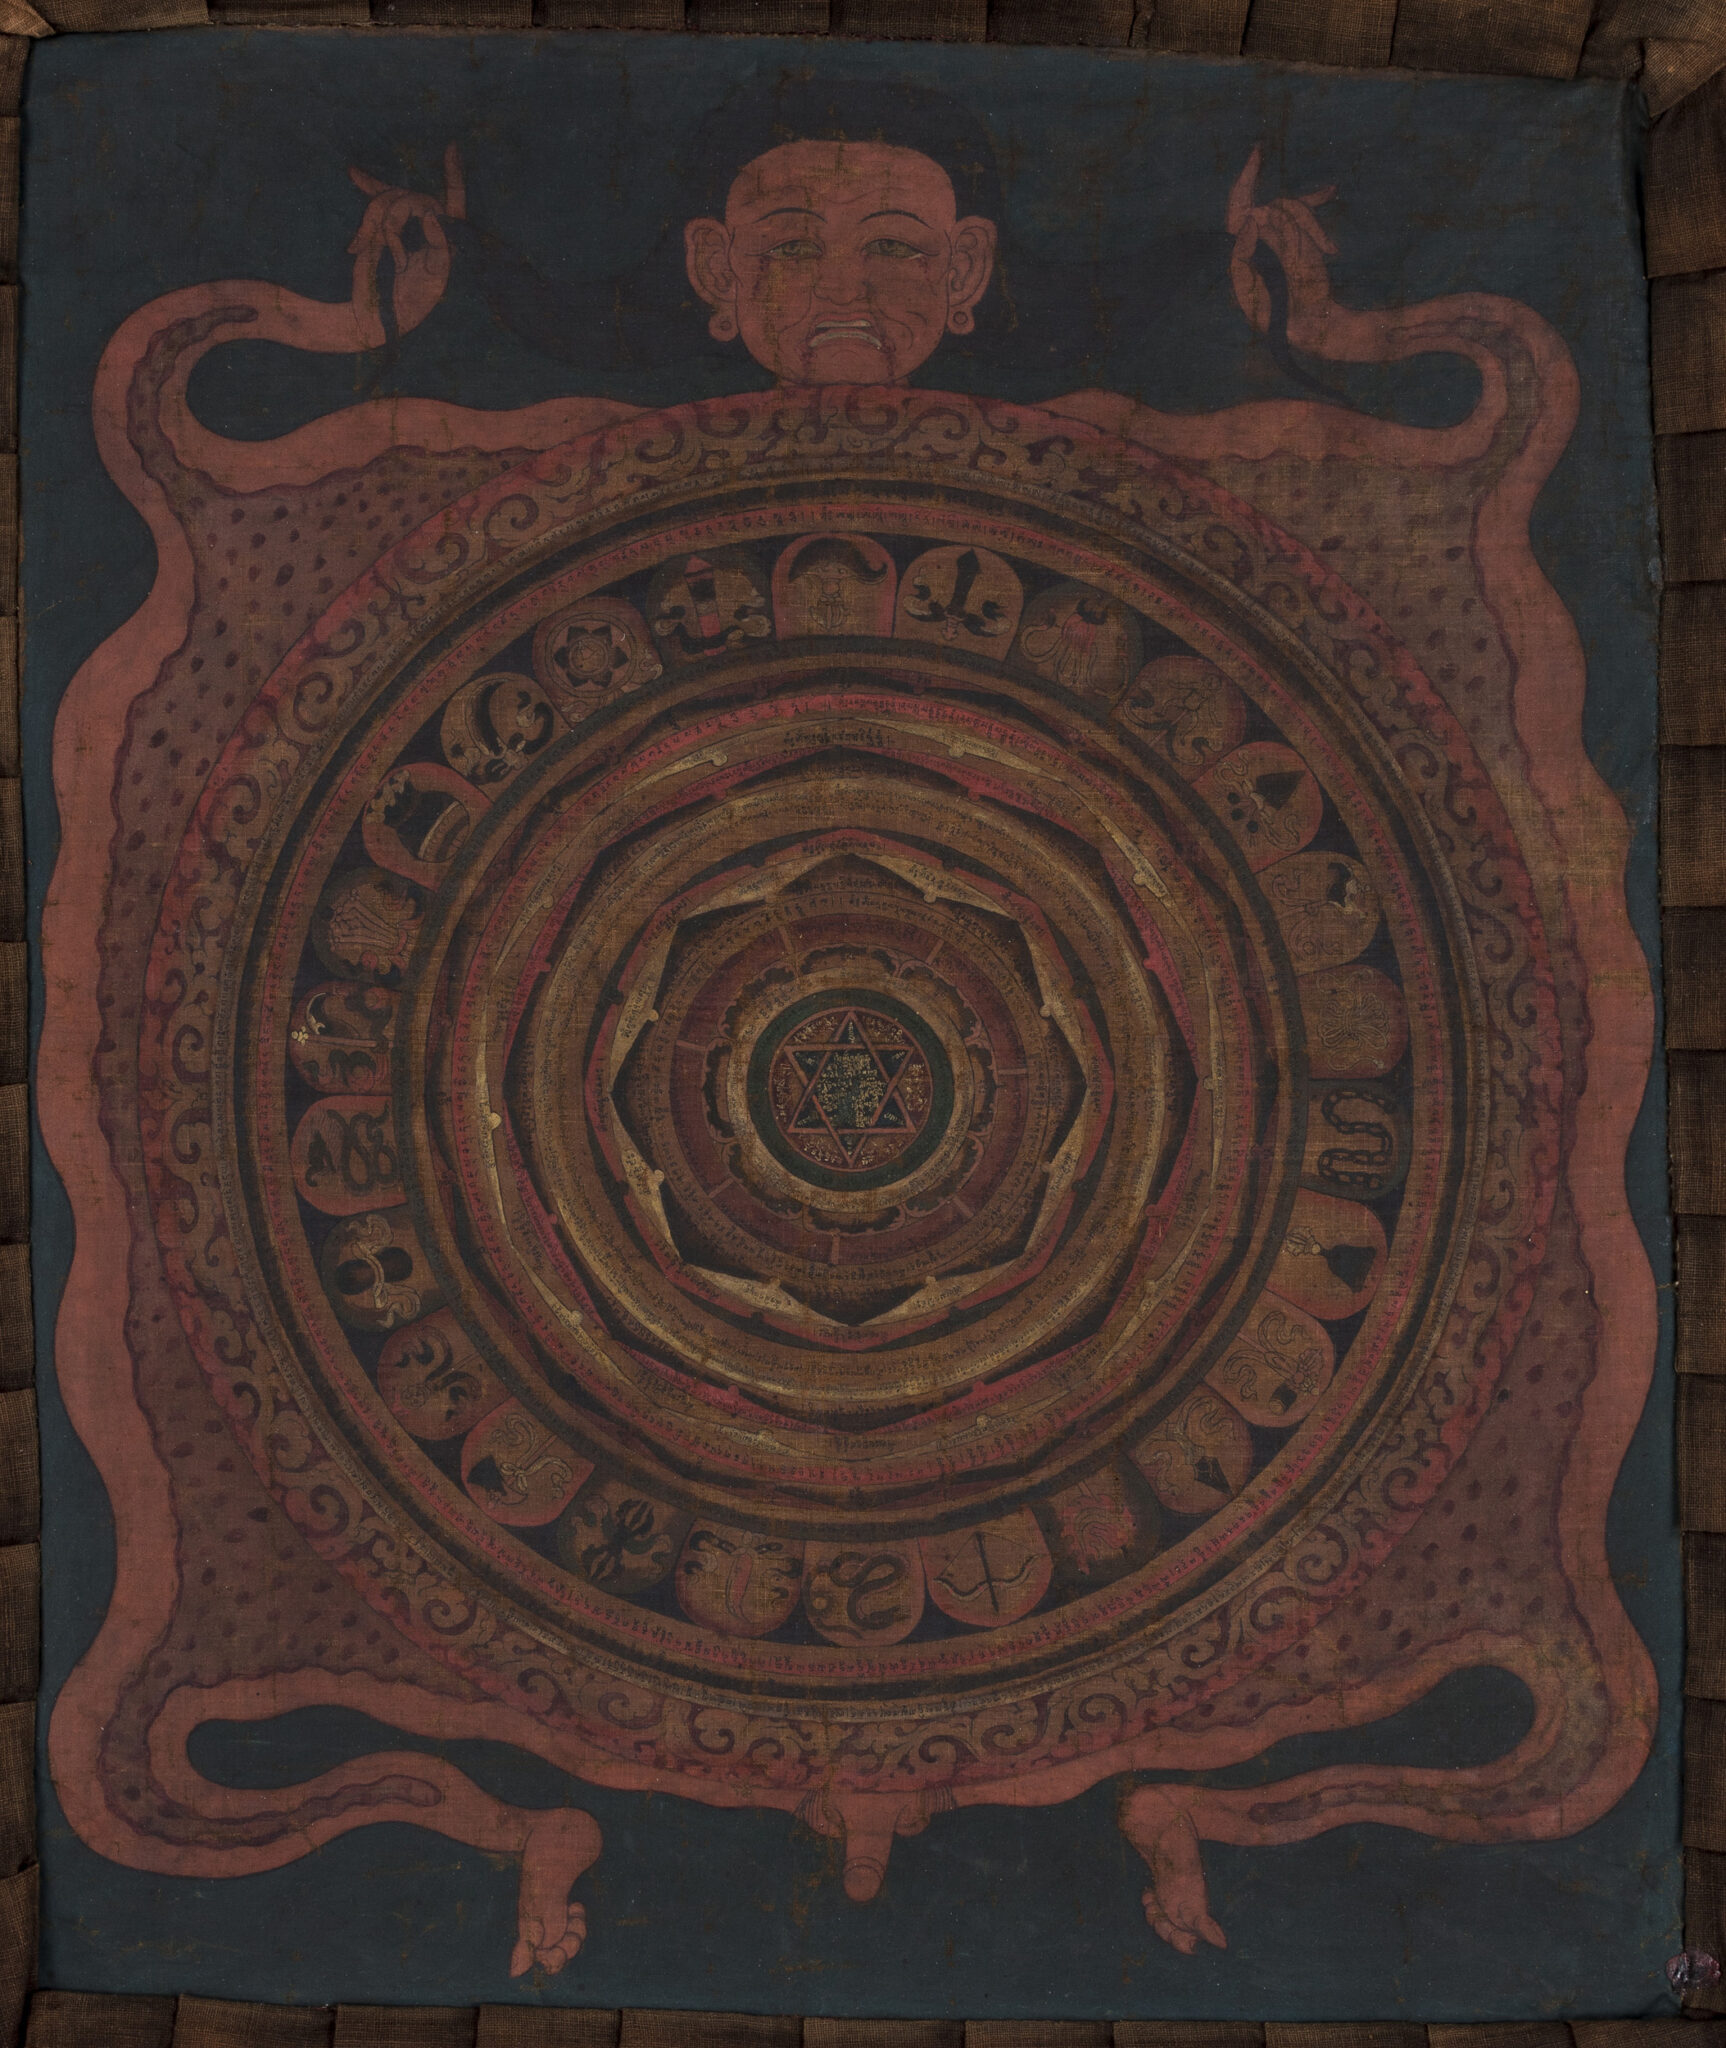 Brick-red mandala with lotus at center surrounded and supported by flayed body of figure holding his hair in his hands